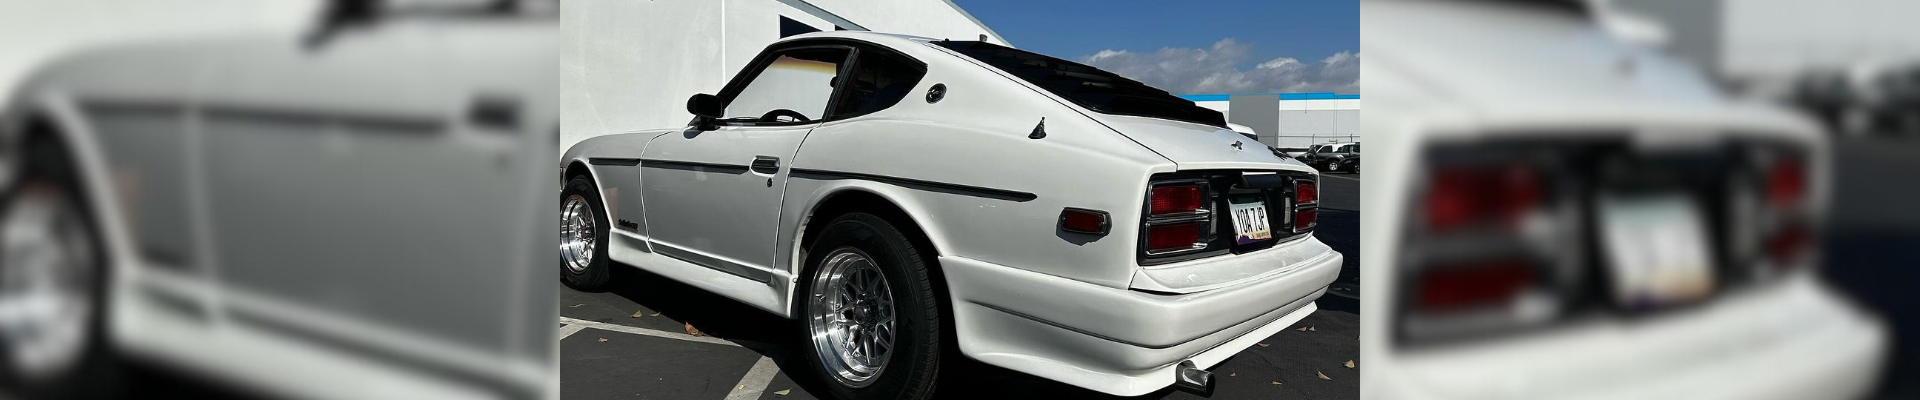 nissan-280Z-gallery-image-3.png